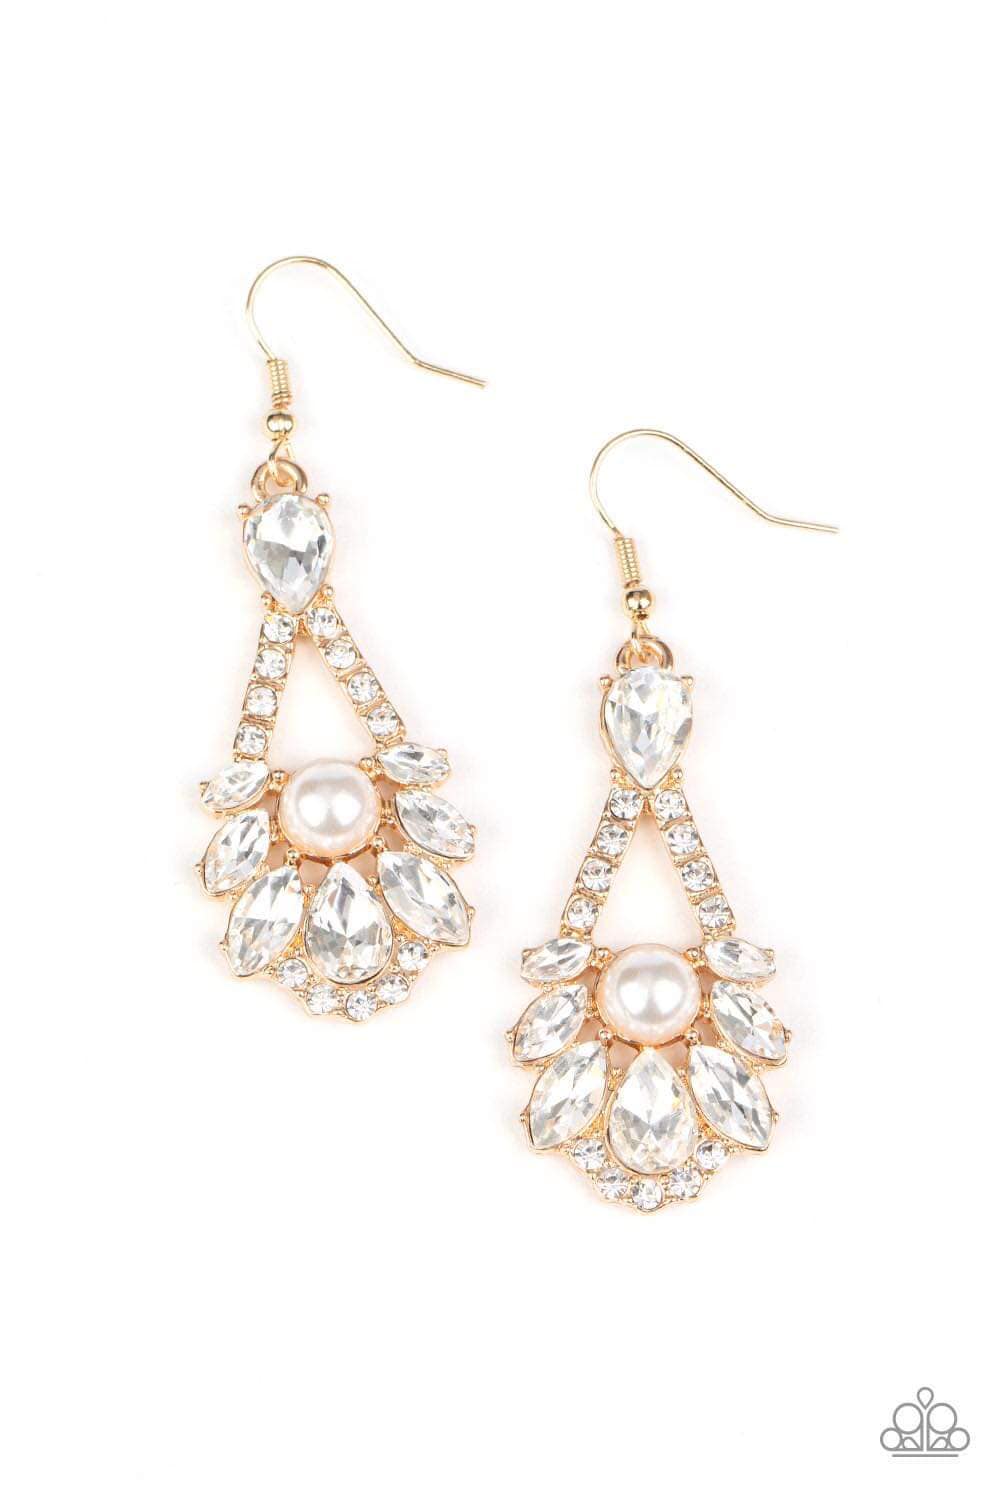 PRISMATIC PRESENCE - GOLD WHITE PEARLS CRYSTAL RHINESTONES PENDANT LIFE OF THE PARTY EARRINGS